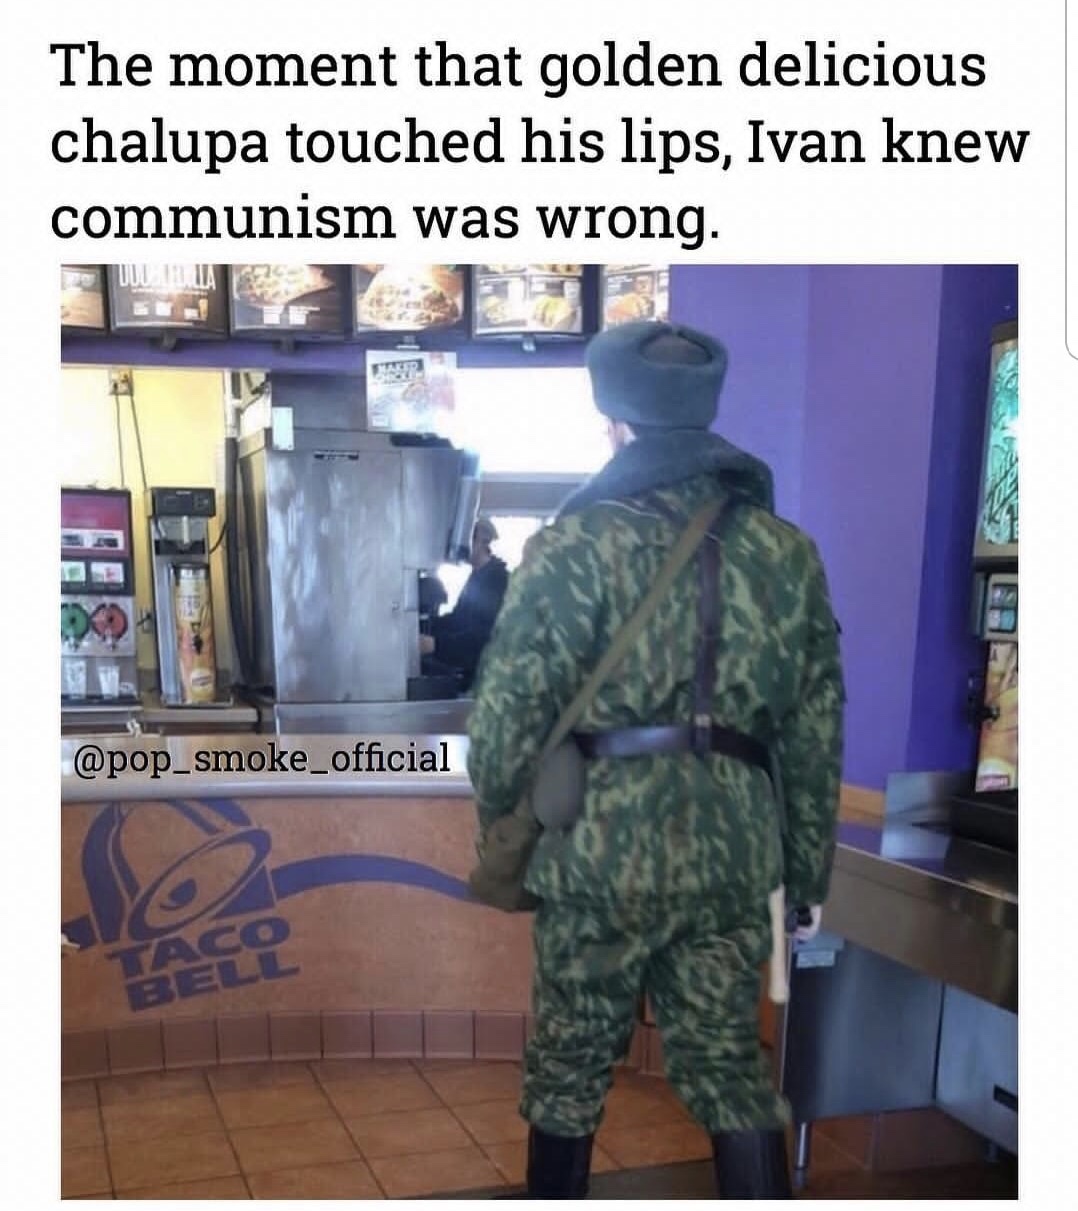 twitter - The moment that golden delicious chalupa touched his lips, Ivan knew communism was wrong.